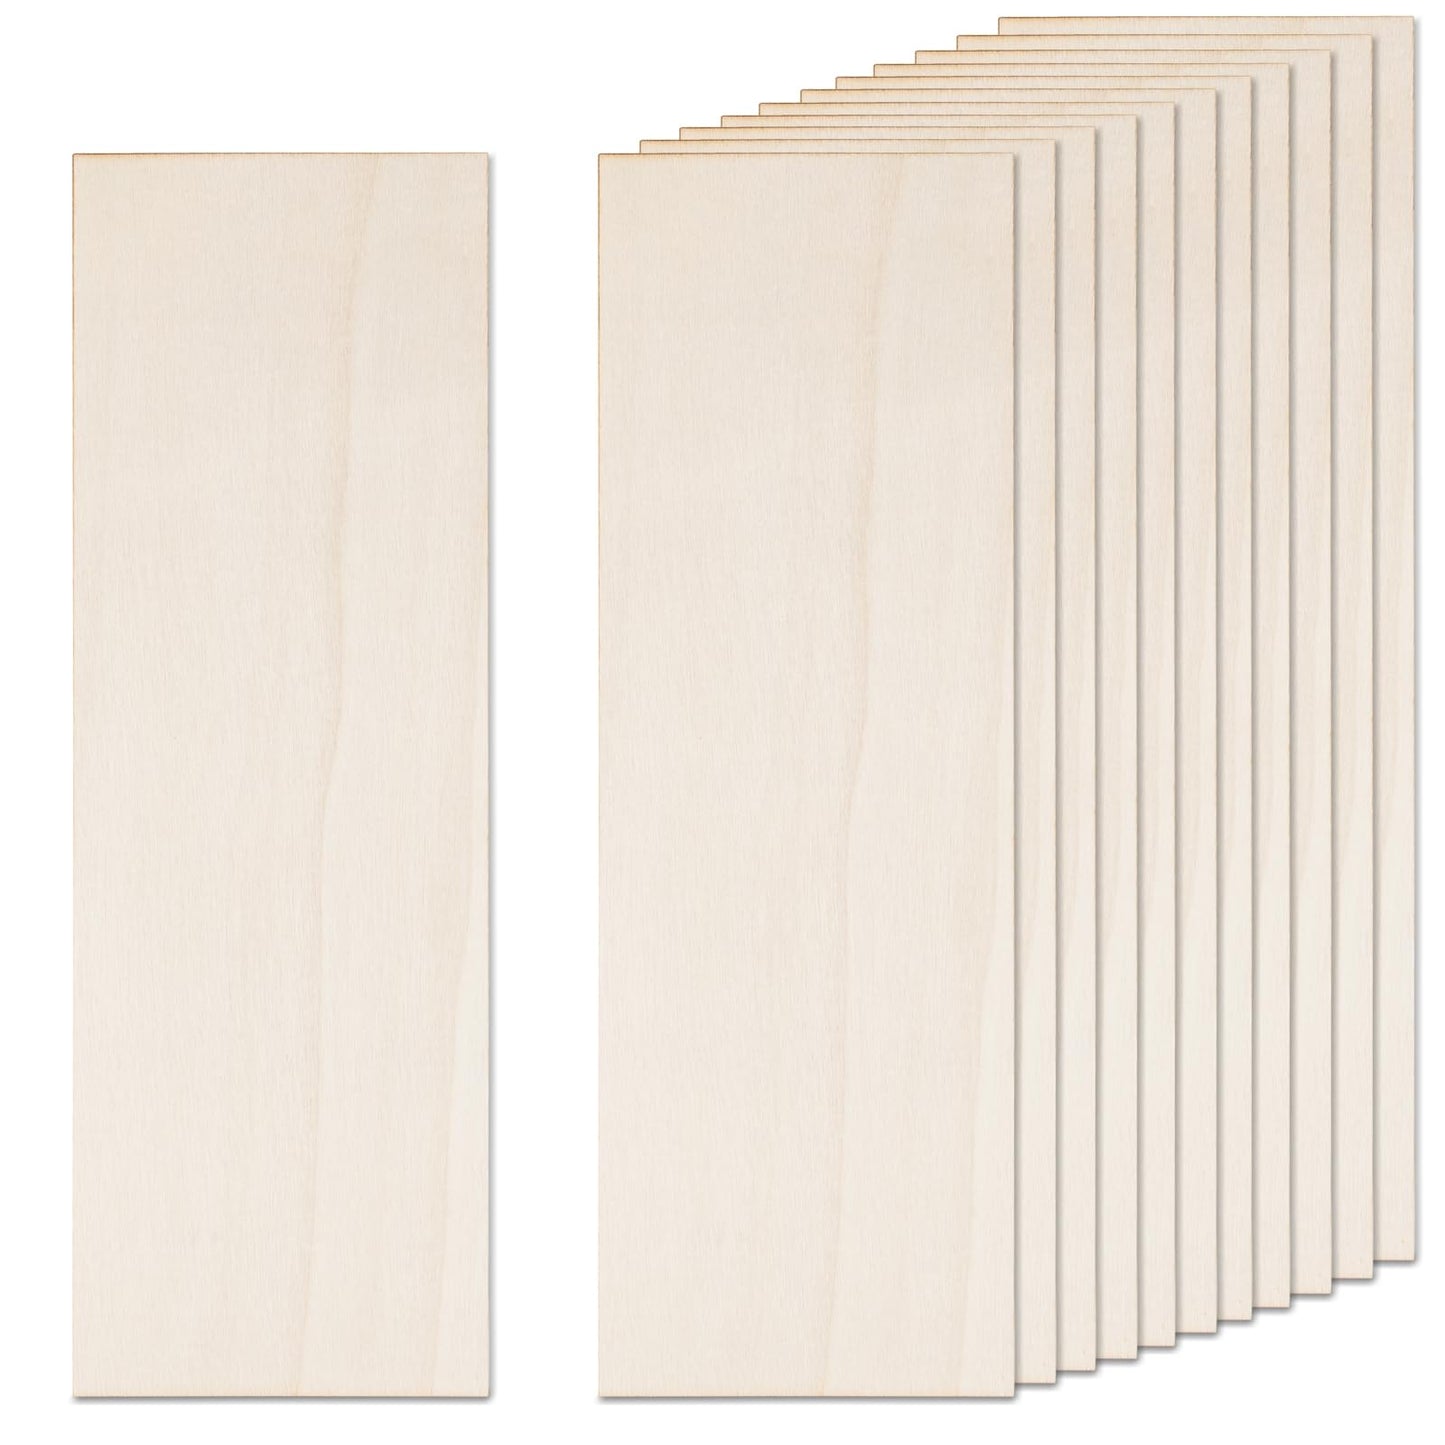 12 Pack Basswood Plywood Sheets for Crafts 12 x 4 x 1/16 Inch-2 mm Thick Unfinished Wood Sheets Thin Plywood Boards for Drawing, Painting, Wood